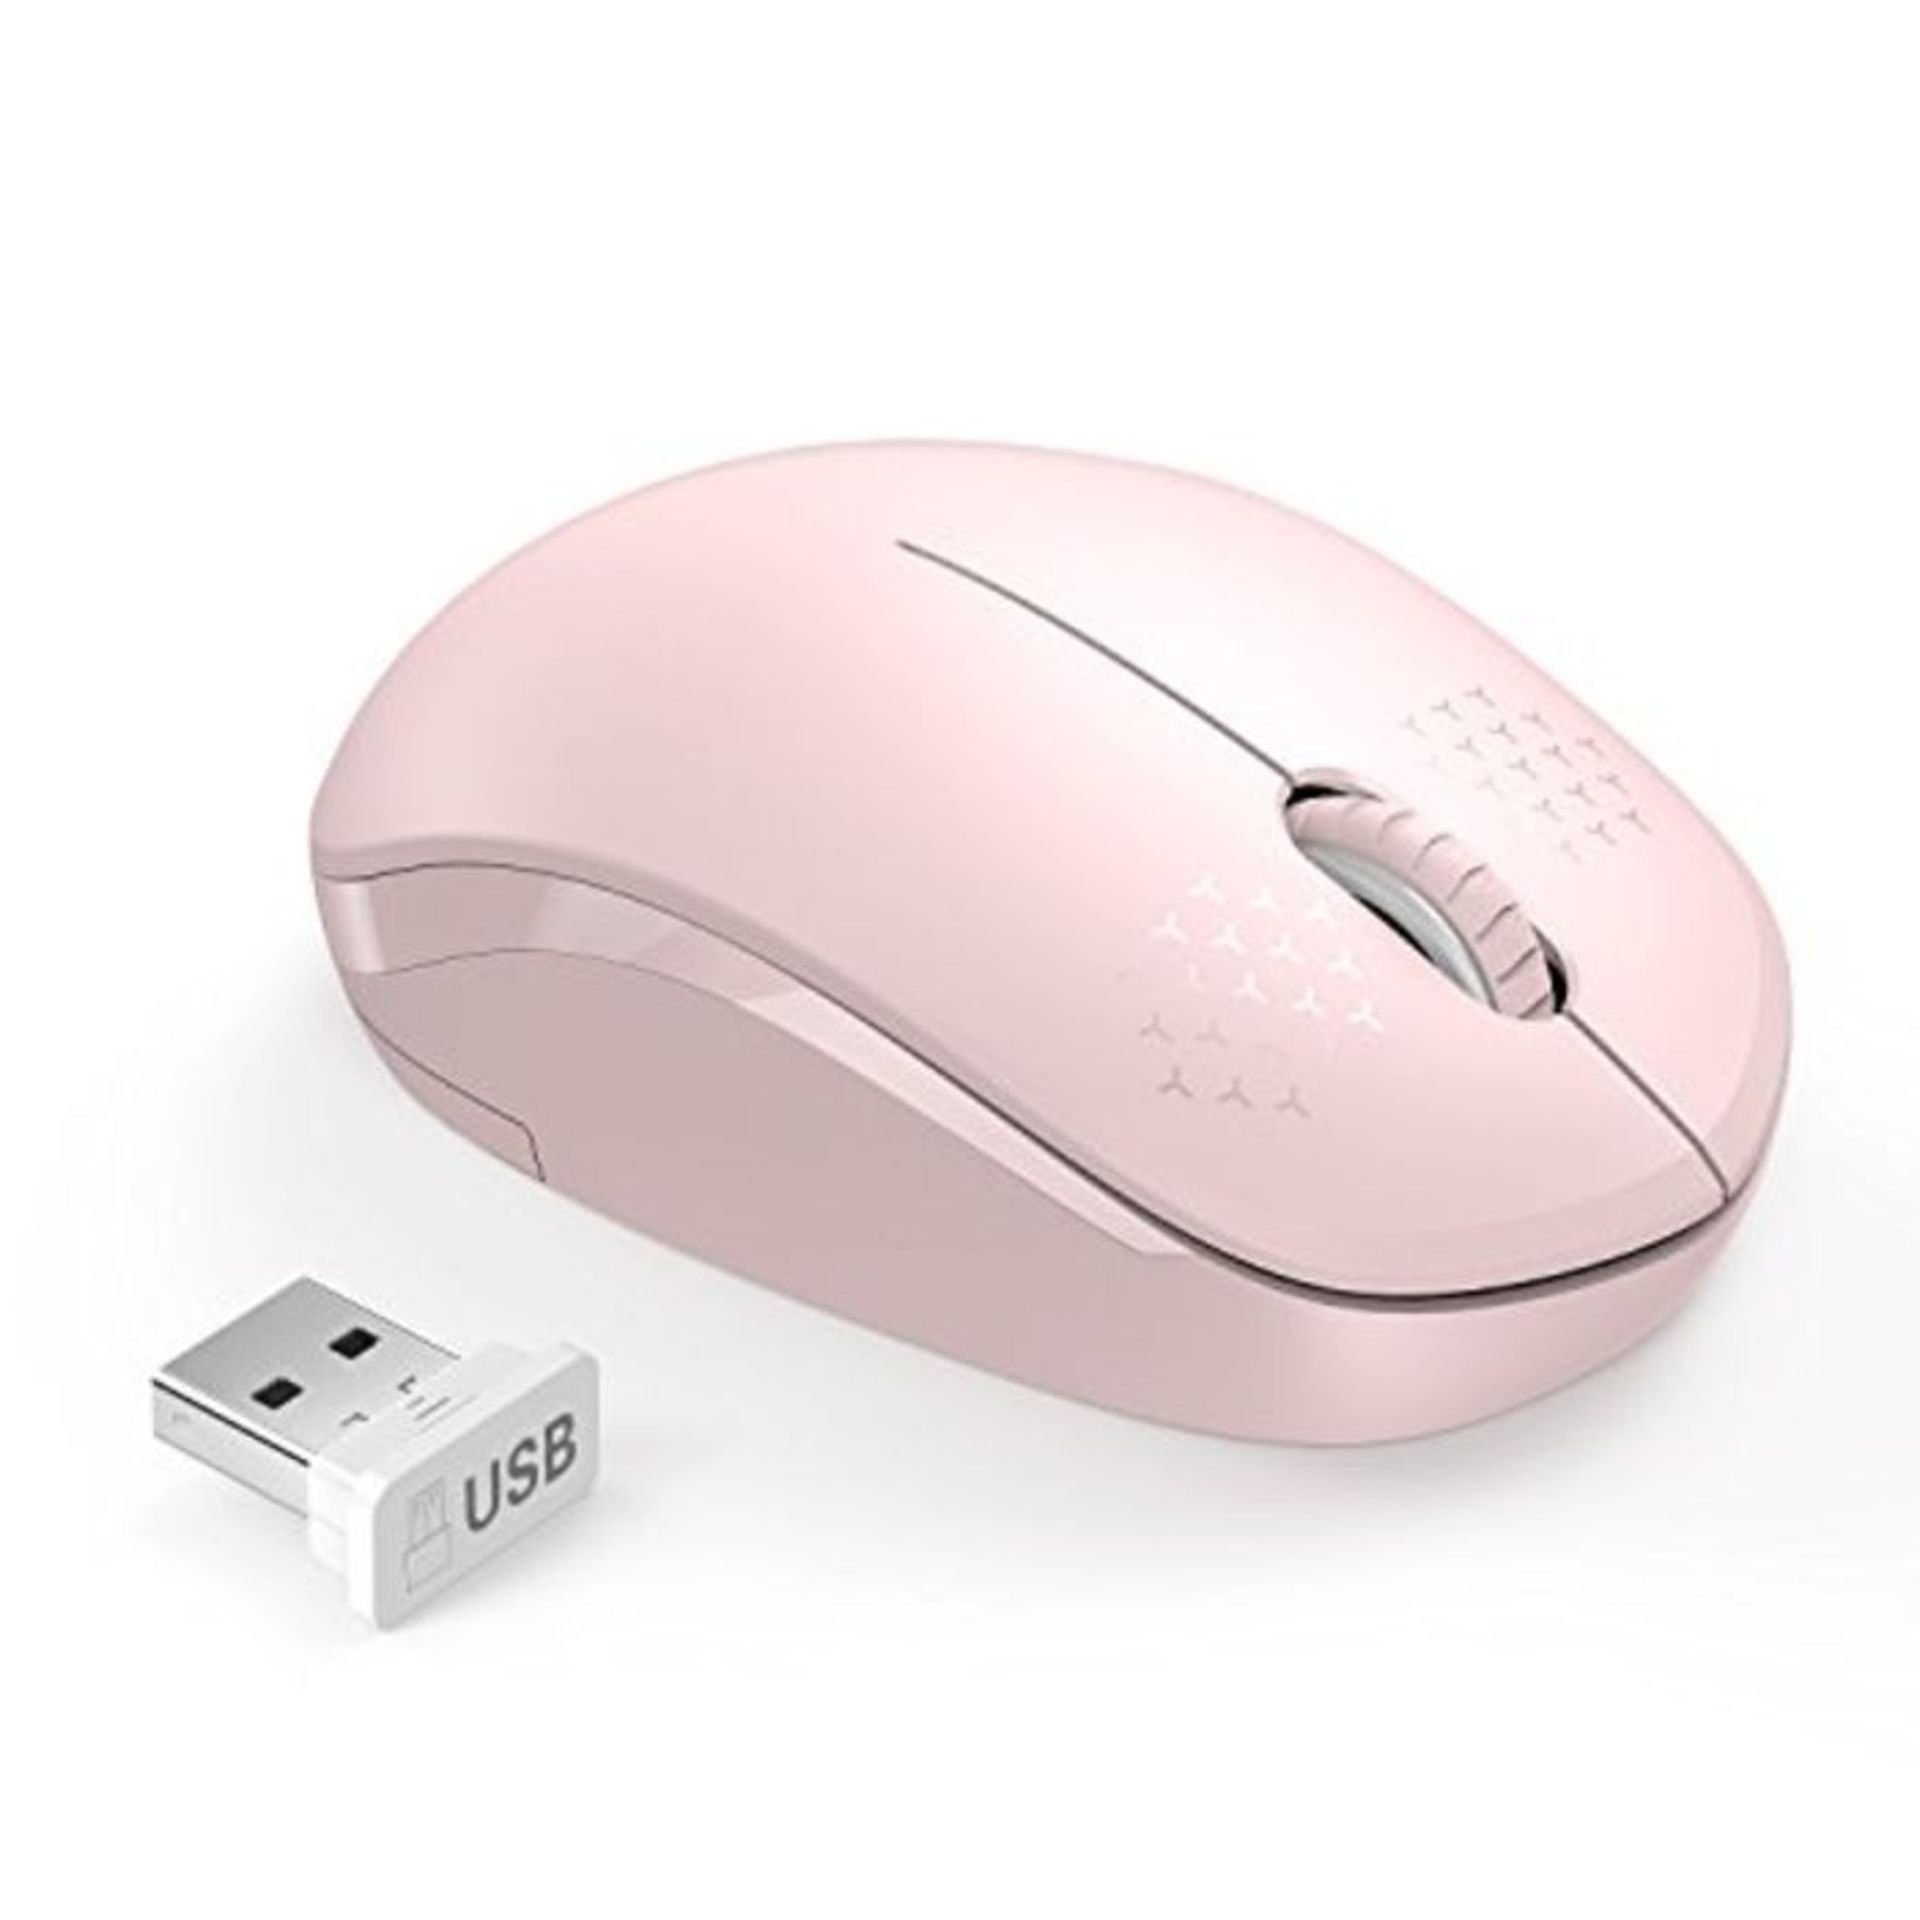 Seenda Wireless Mouse, Noiseless 2.4G Cordless Mouse Portable Computer Mice with USB N